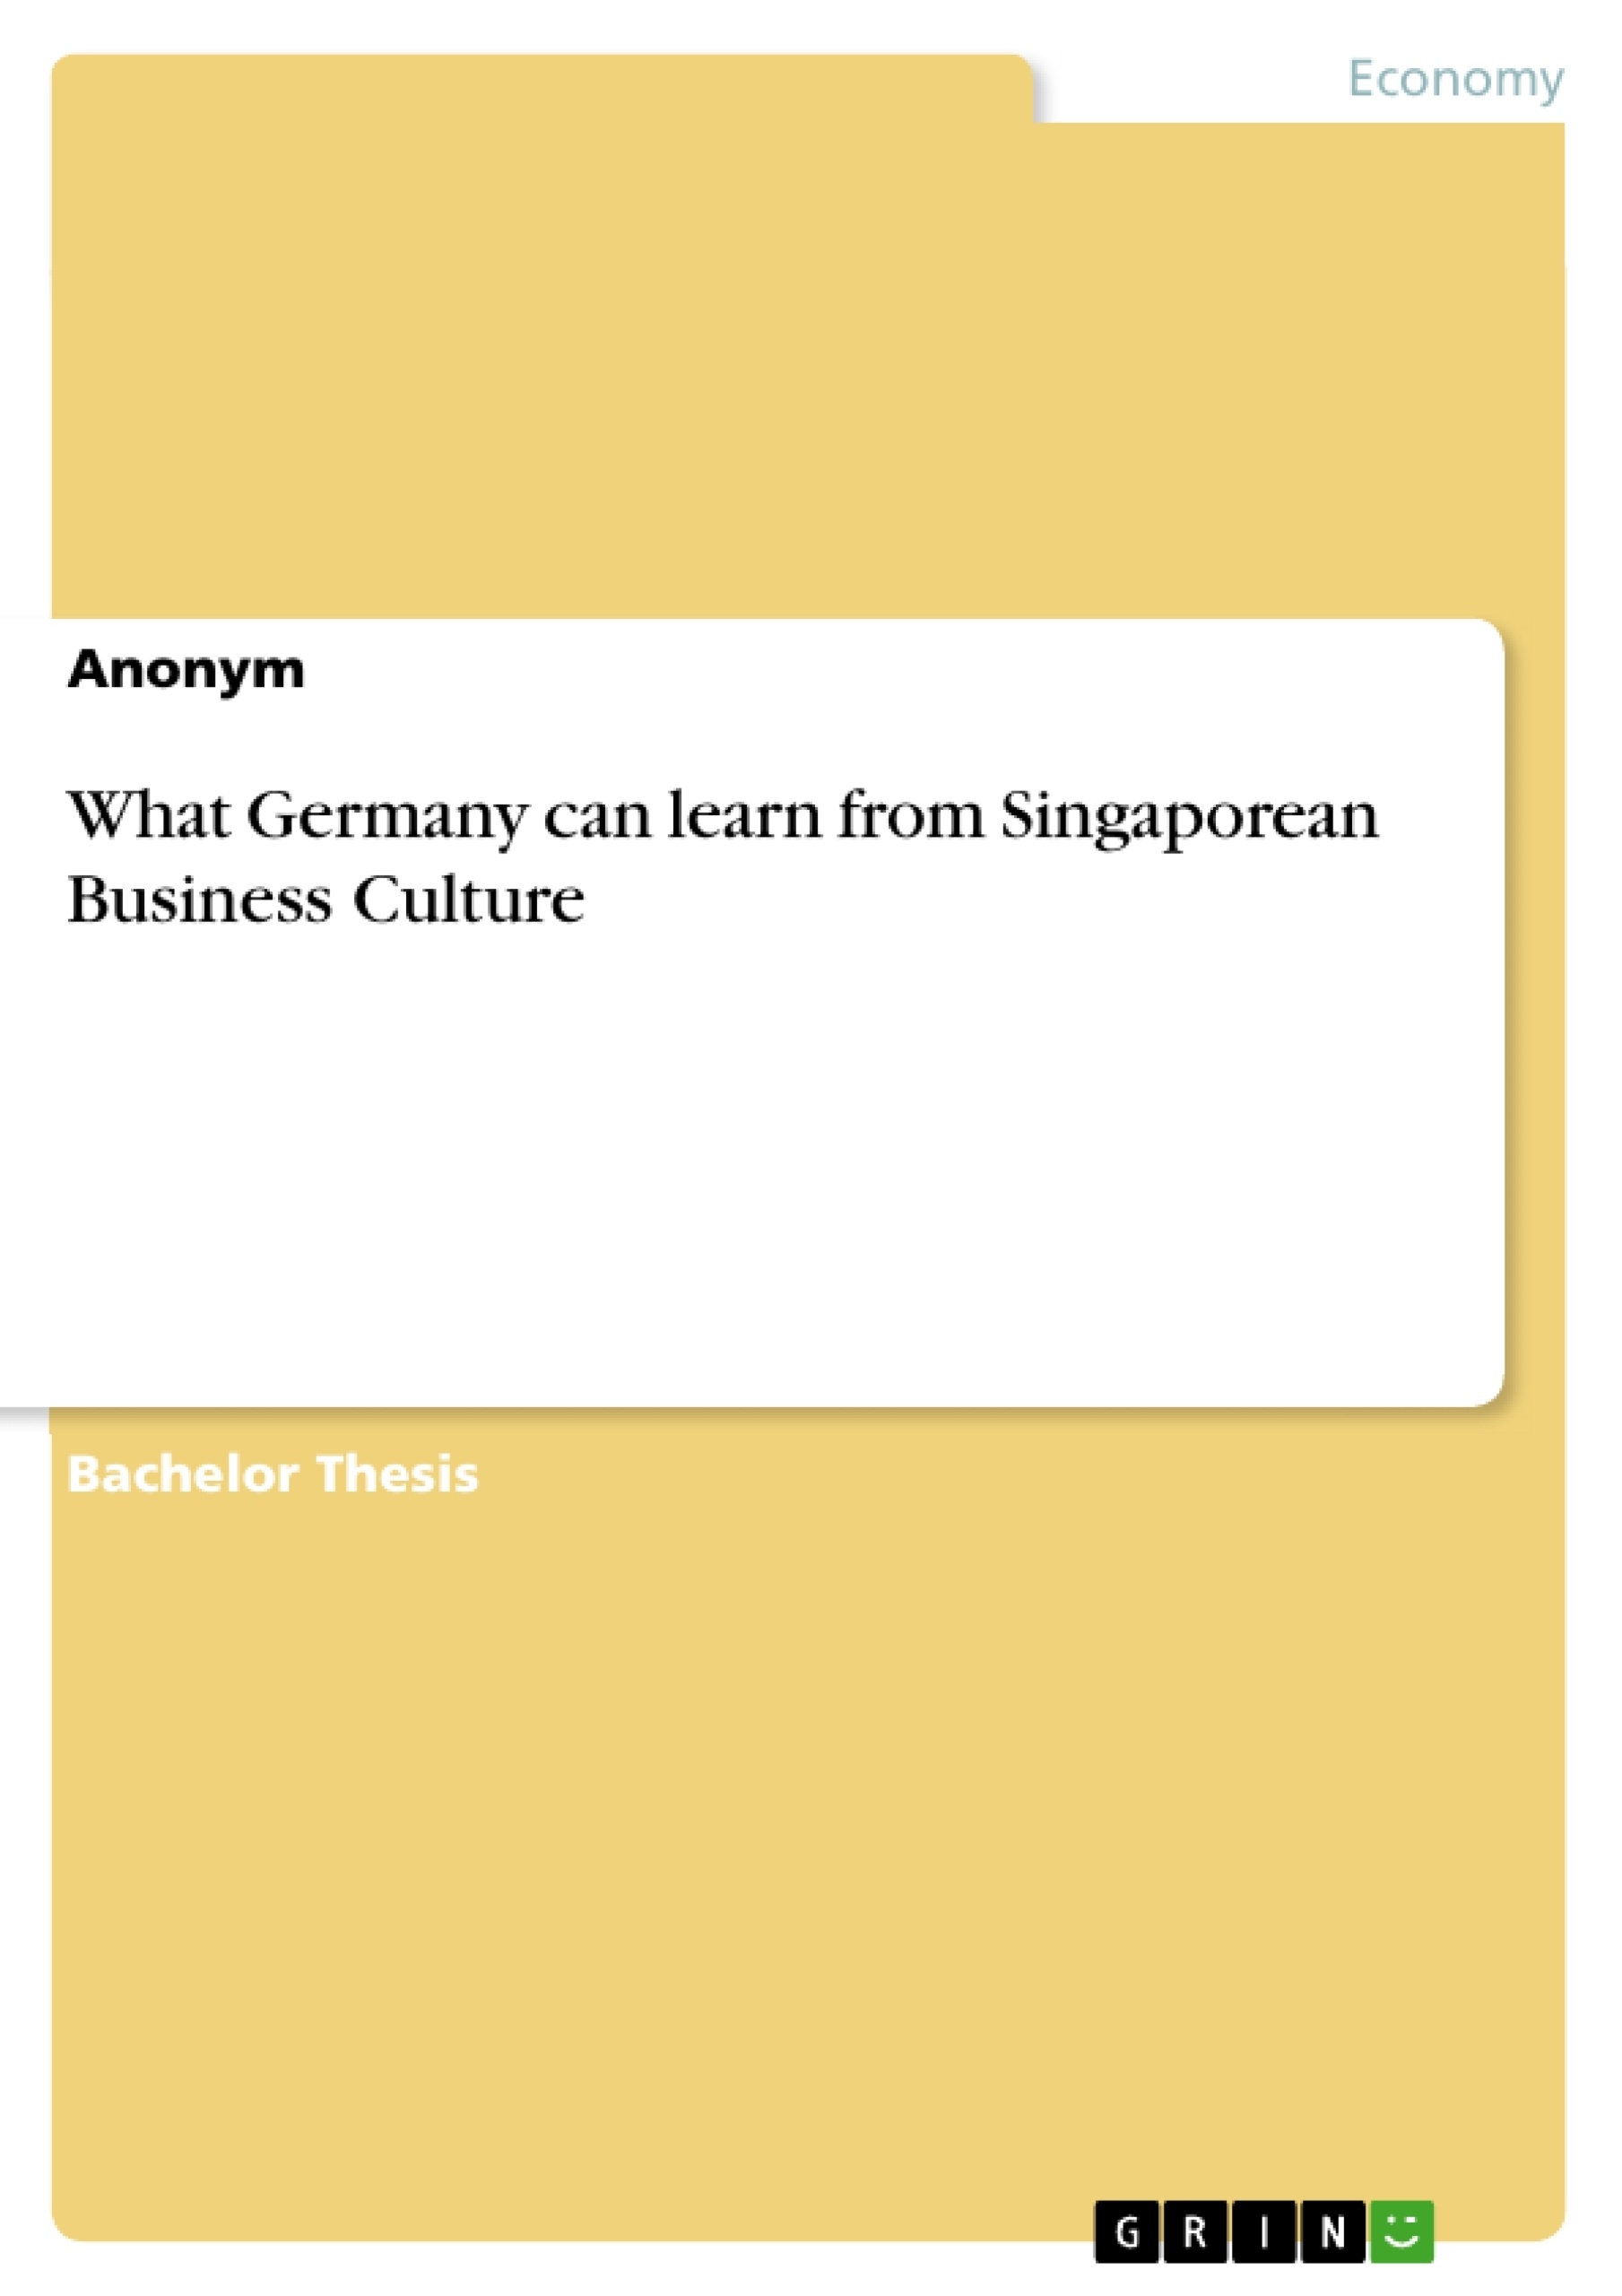 Título: What Germany can learn from Singaporean Business Culture